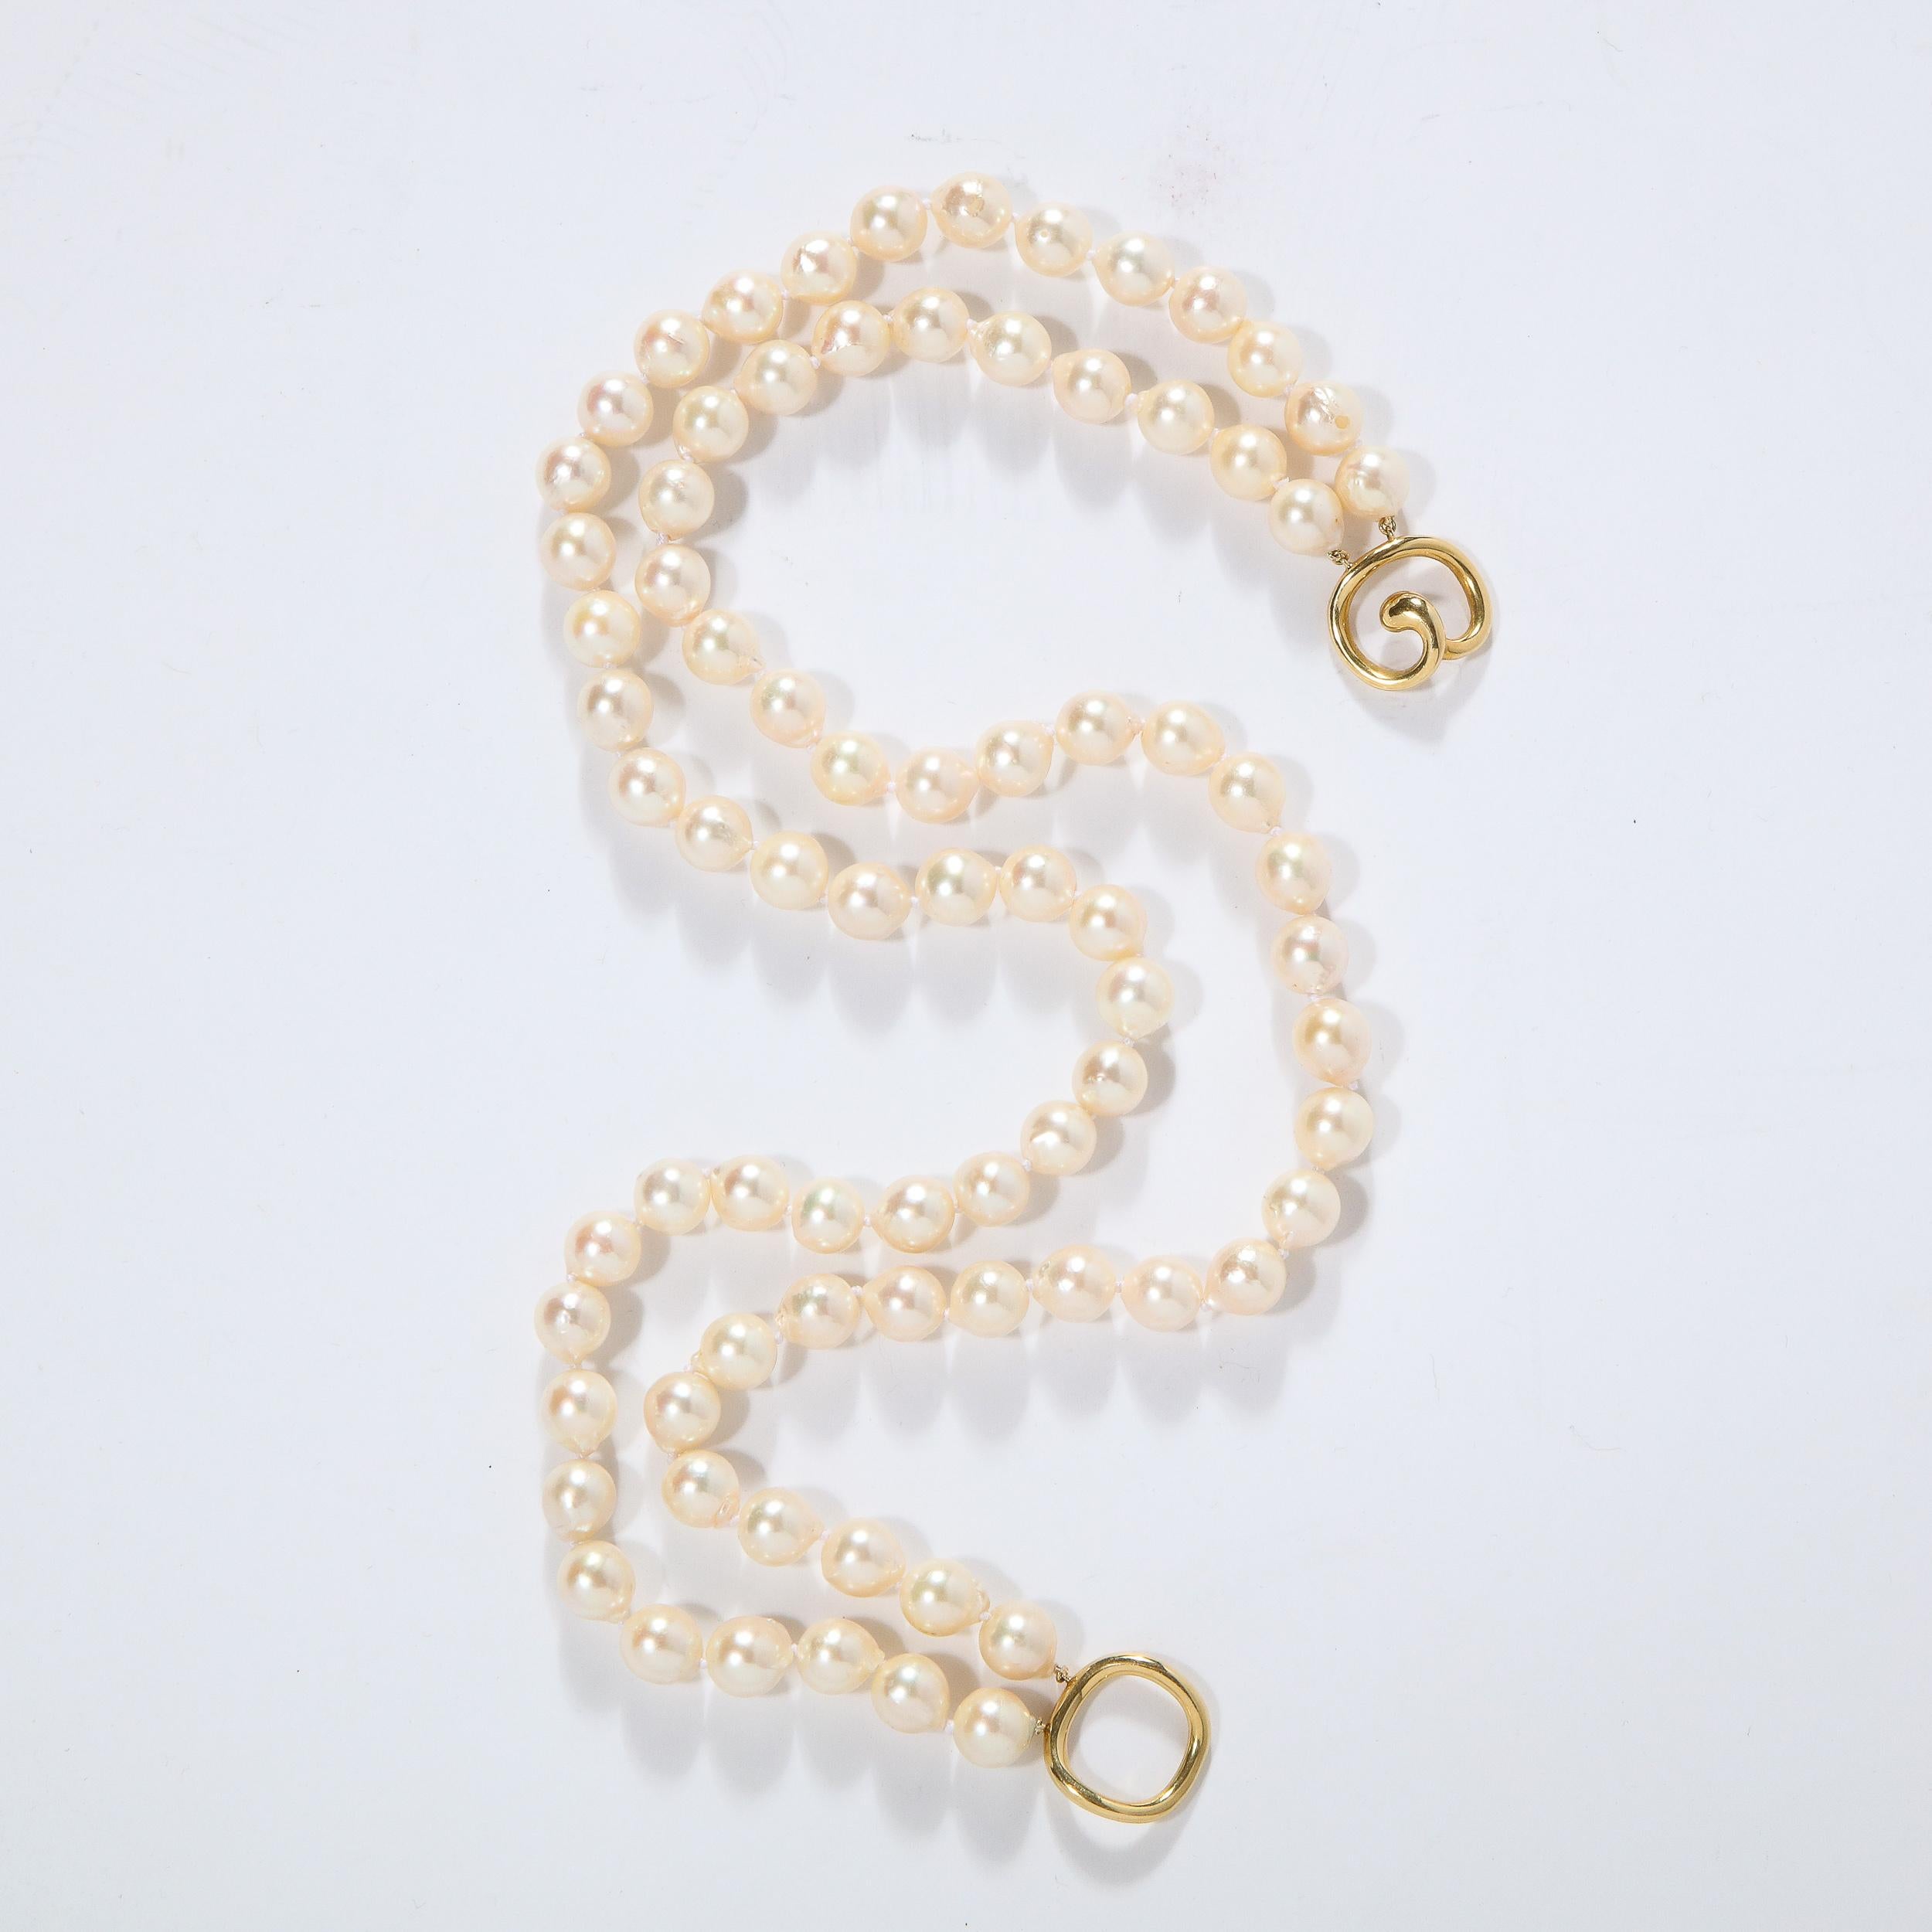 Necklace signed Angela Cummings double strand of hand knotted pearls with an modernist 18k yellow gold clasp. Pearls average approximately 9mm. Stamped 1984 Cummings 18k. Total weight of the necklace is 60.5 grams. It has been newly restrung and is